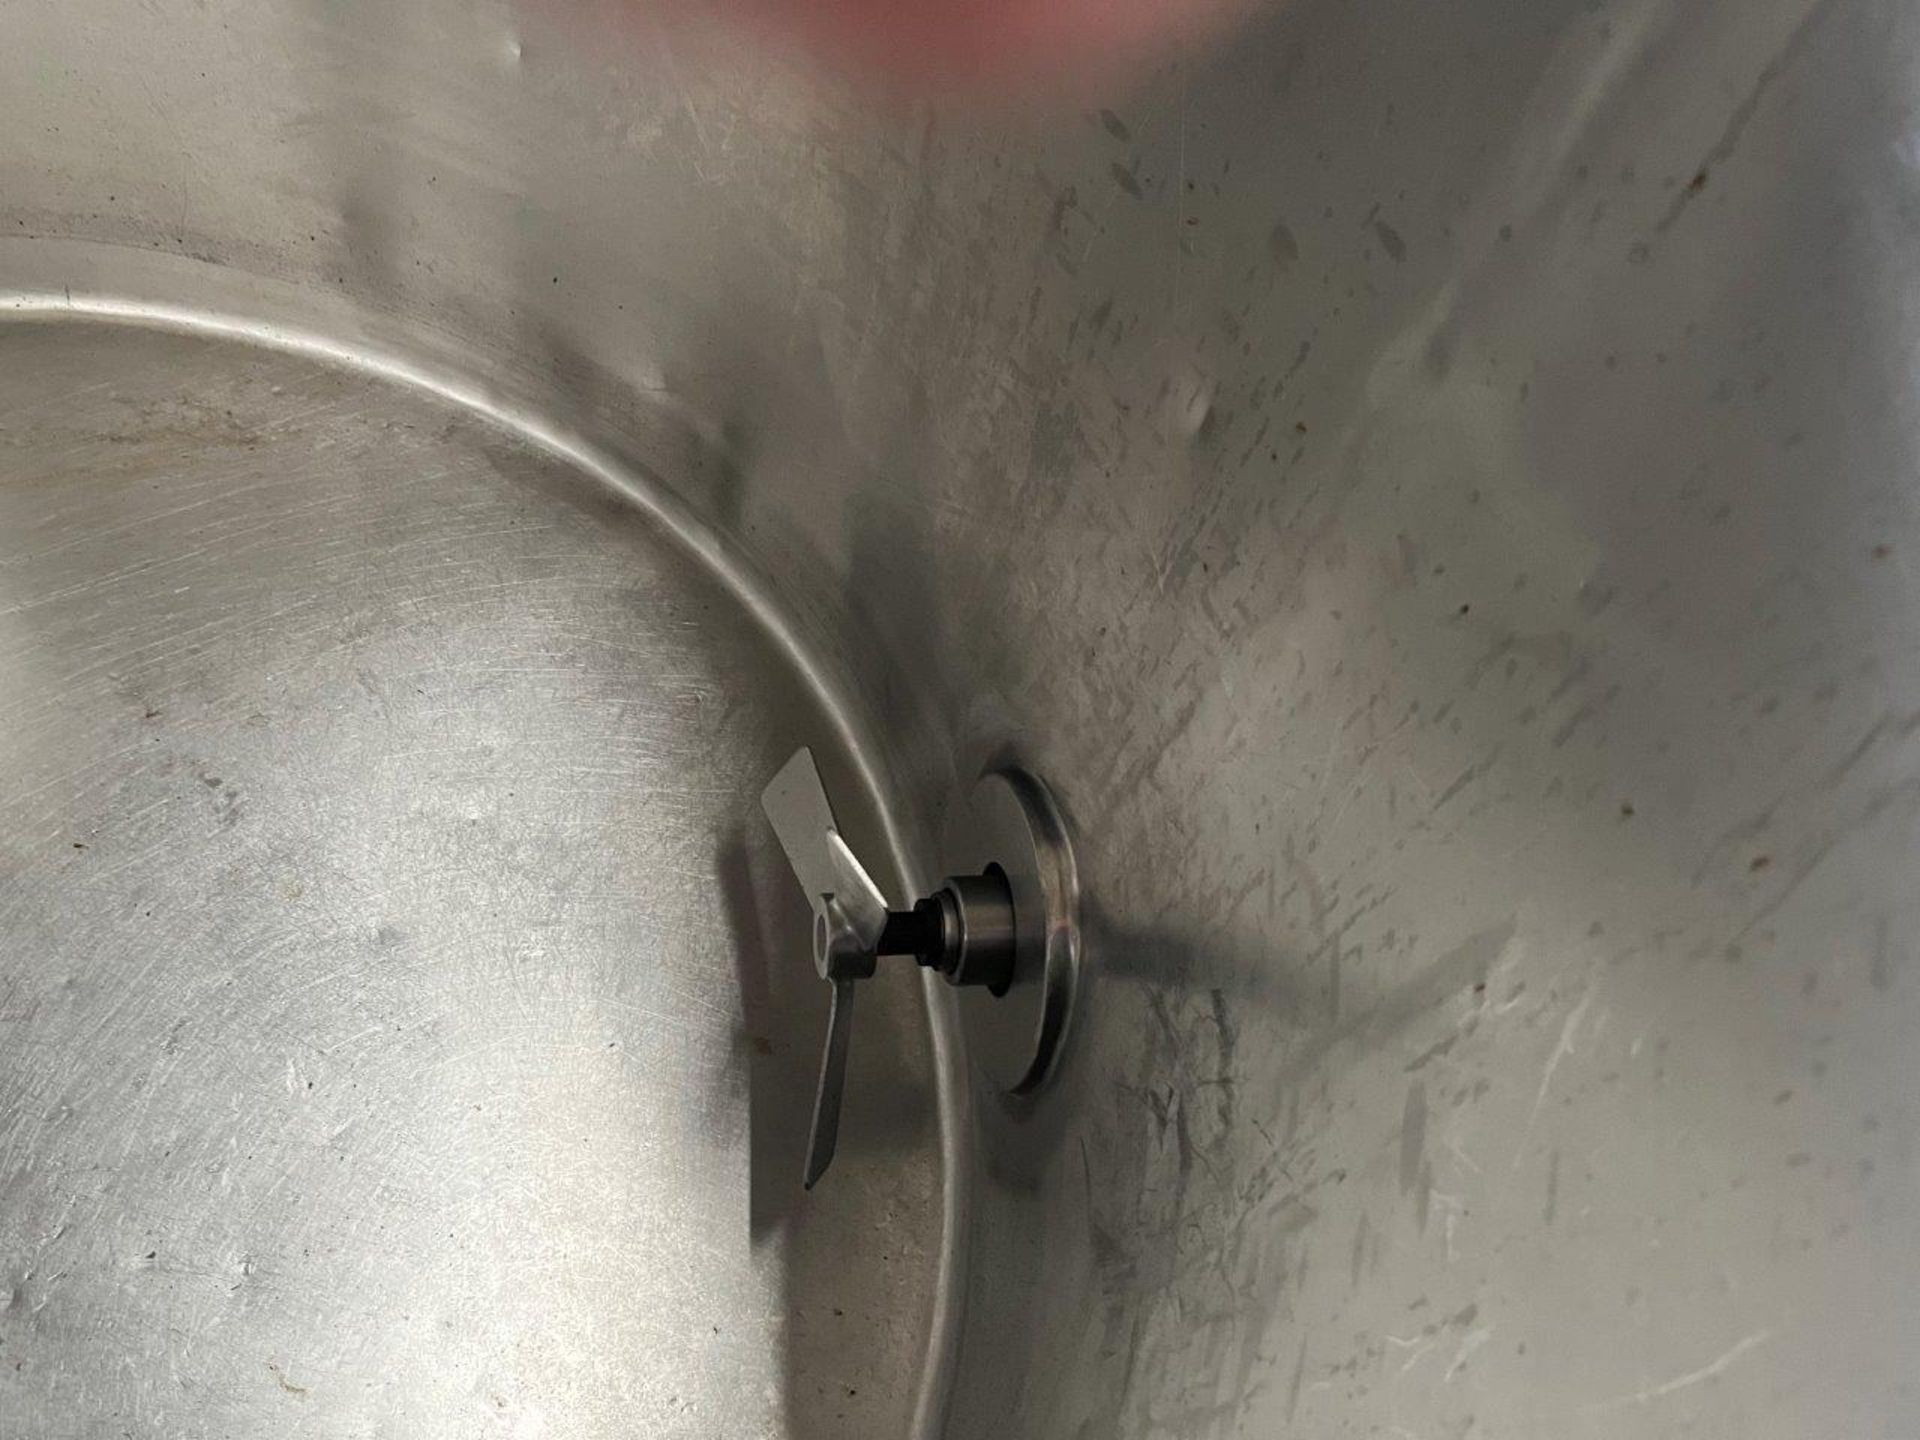 Stainless steel mixing vessel - Image 3 of 3